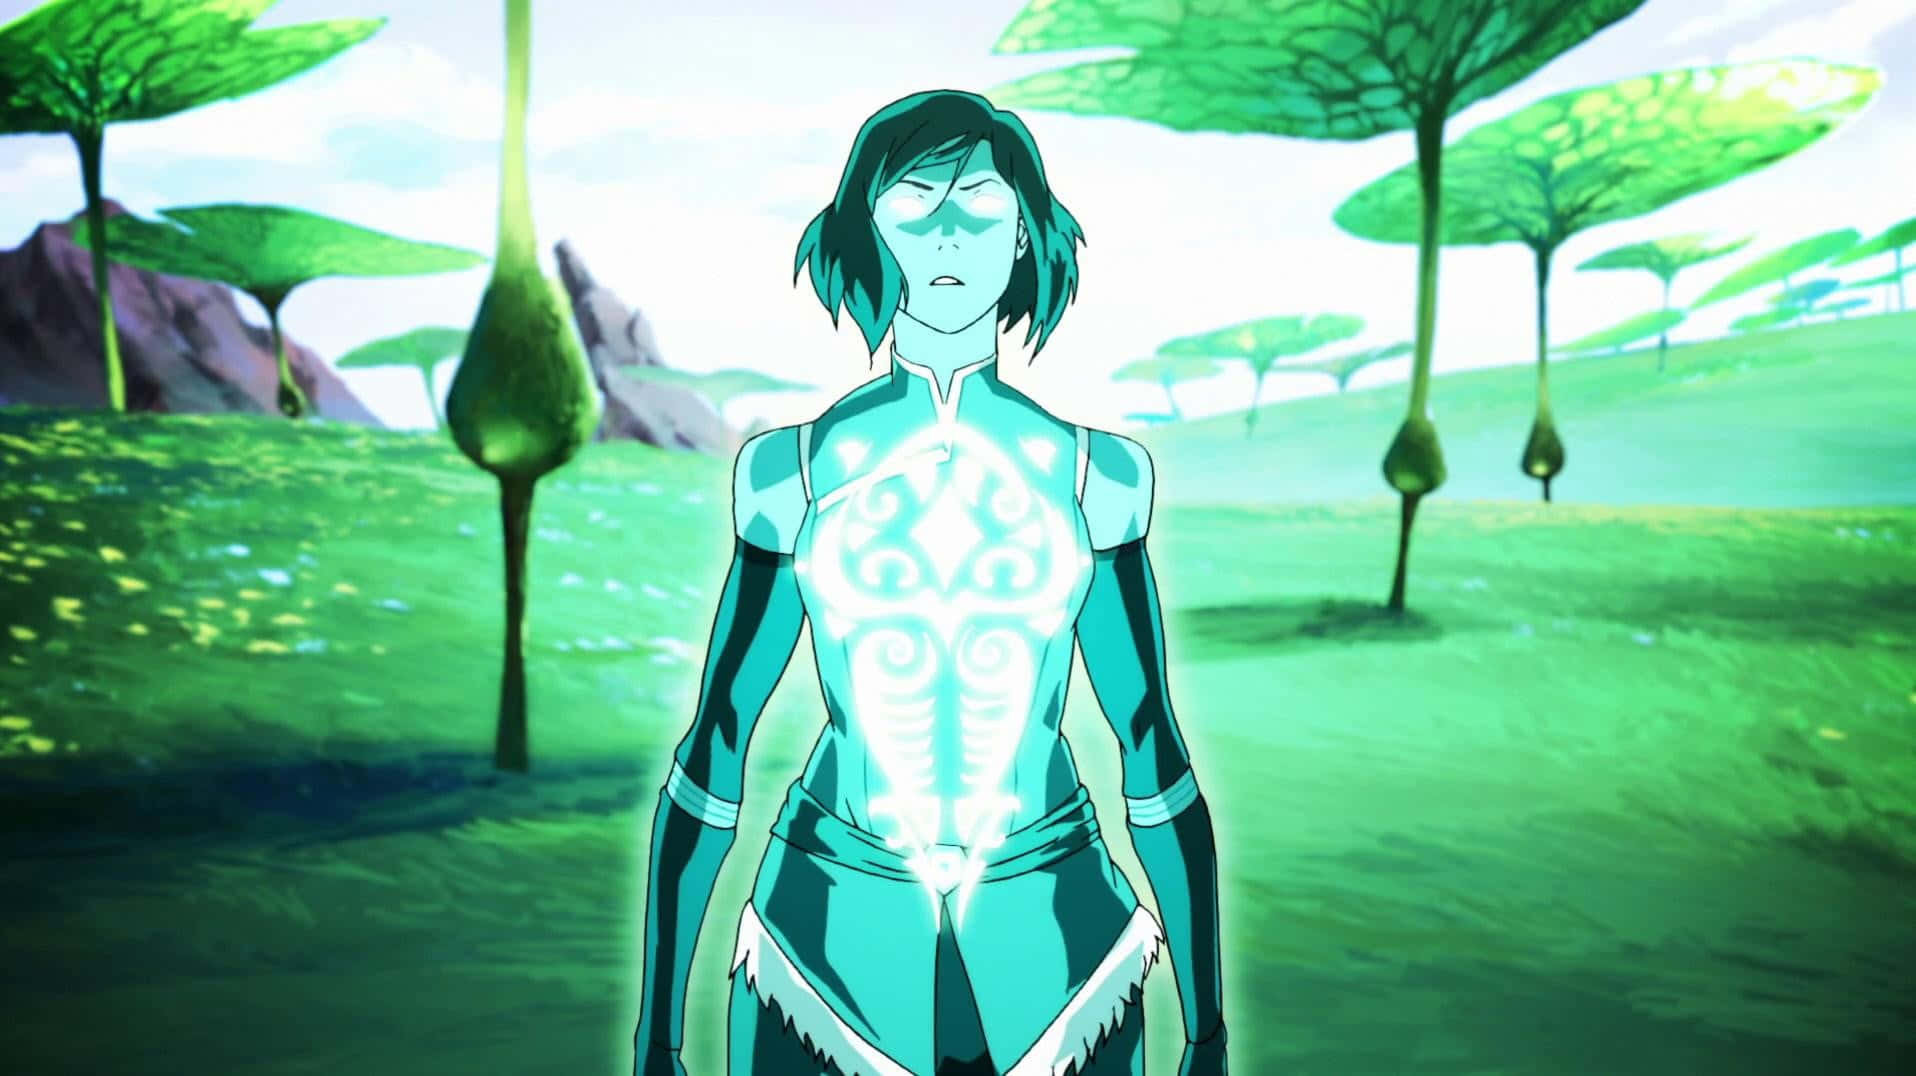 Korra Taking Action to Protect the Avatar Wallpaper